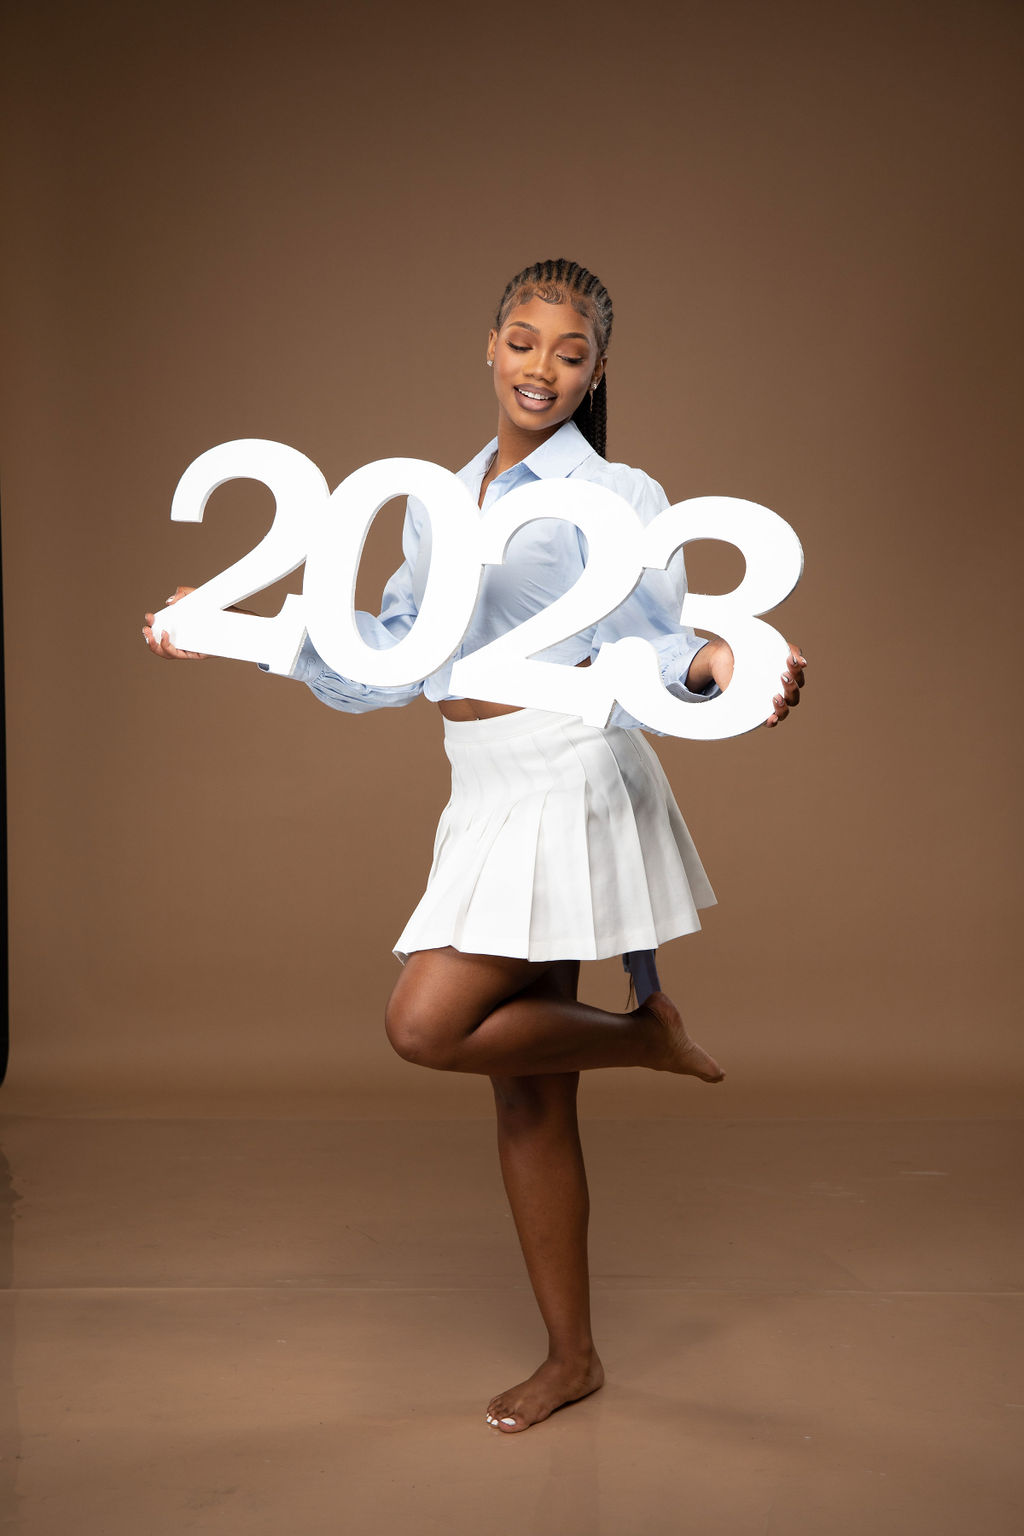 Picture ideas for girls include our giant 2023 photo prop.